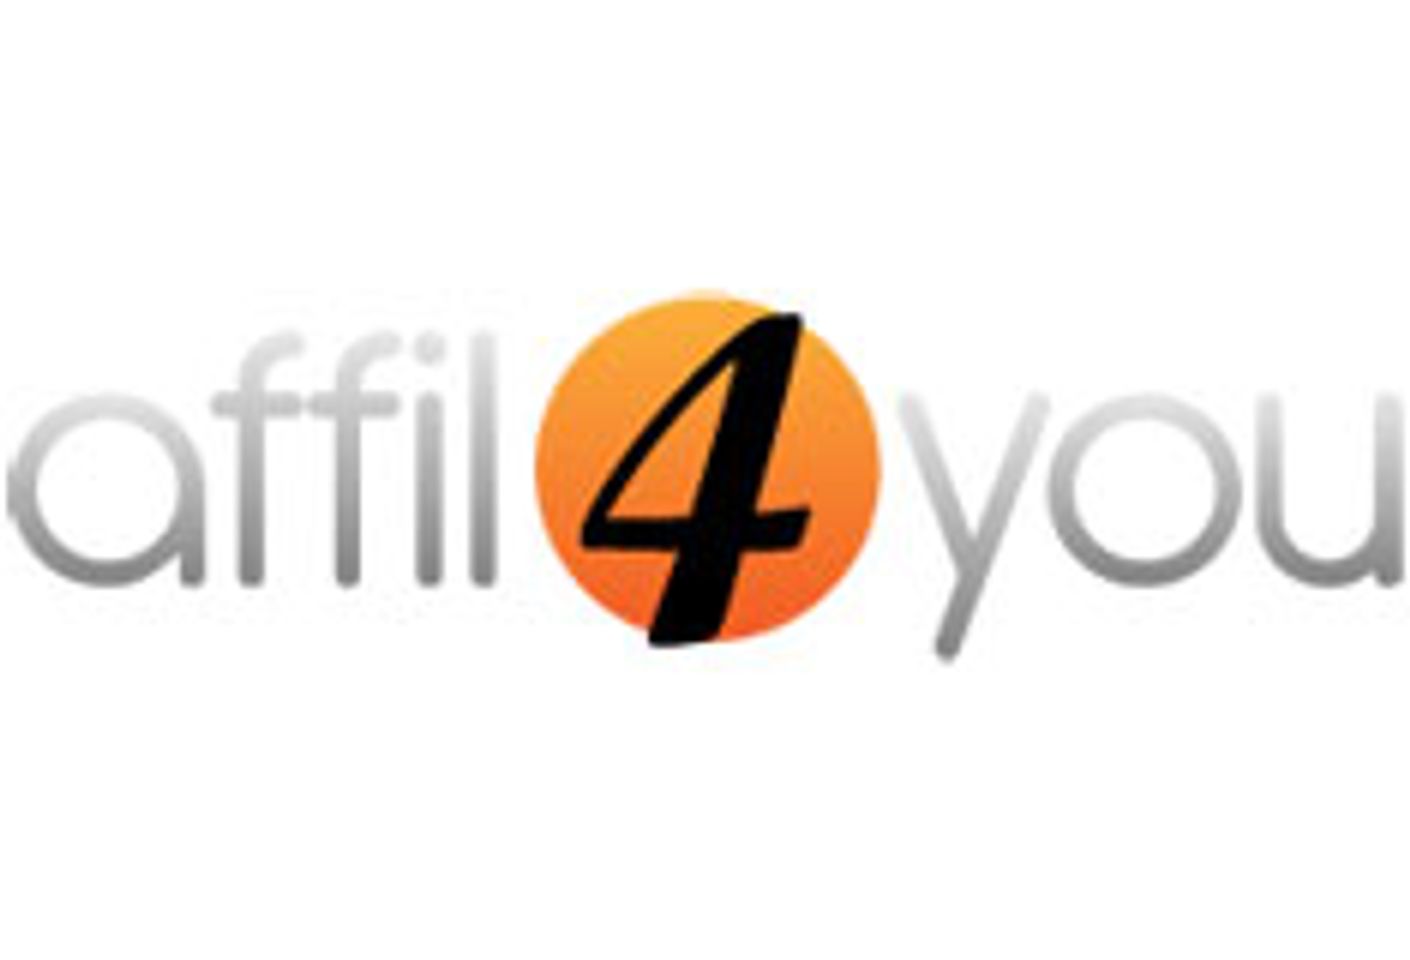 Affil4You Has Banner 2014, Even More Expected In 2015